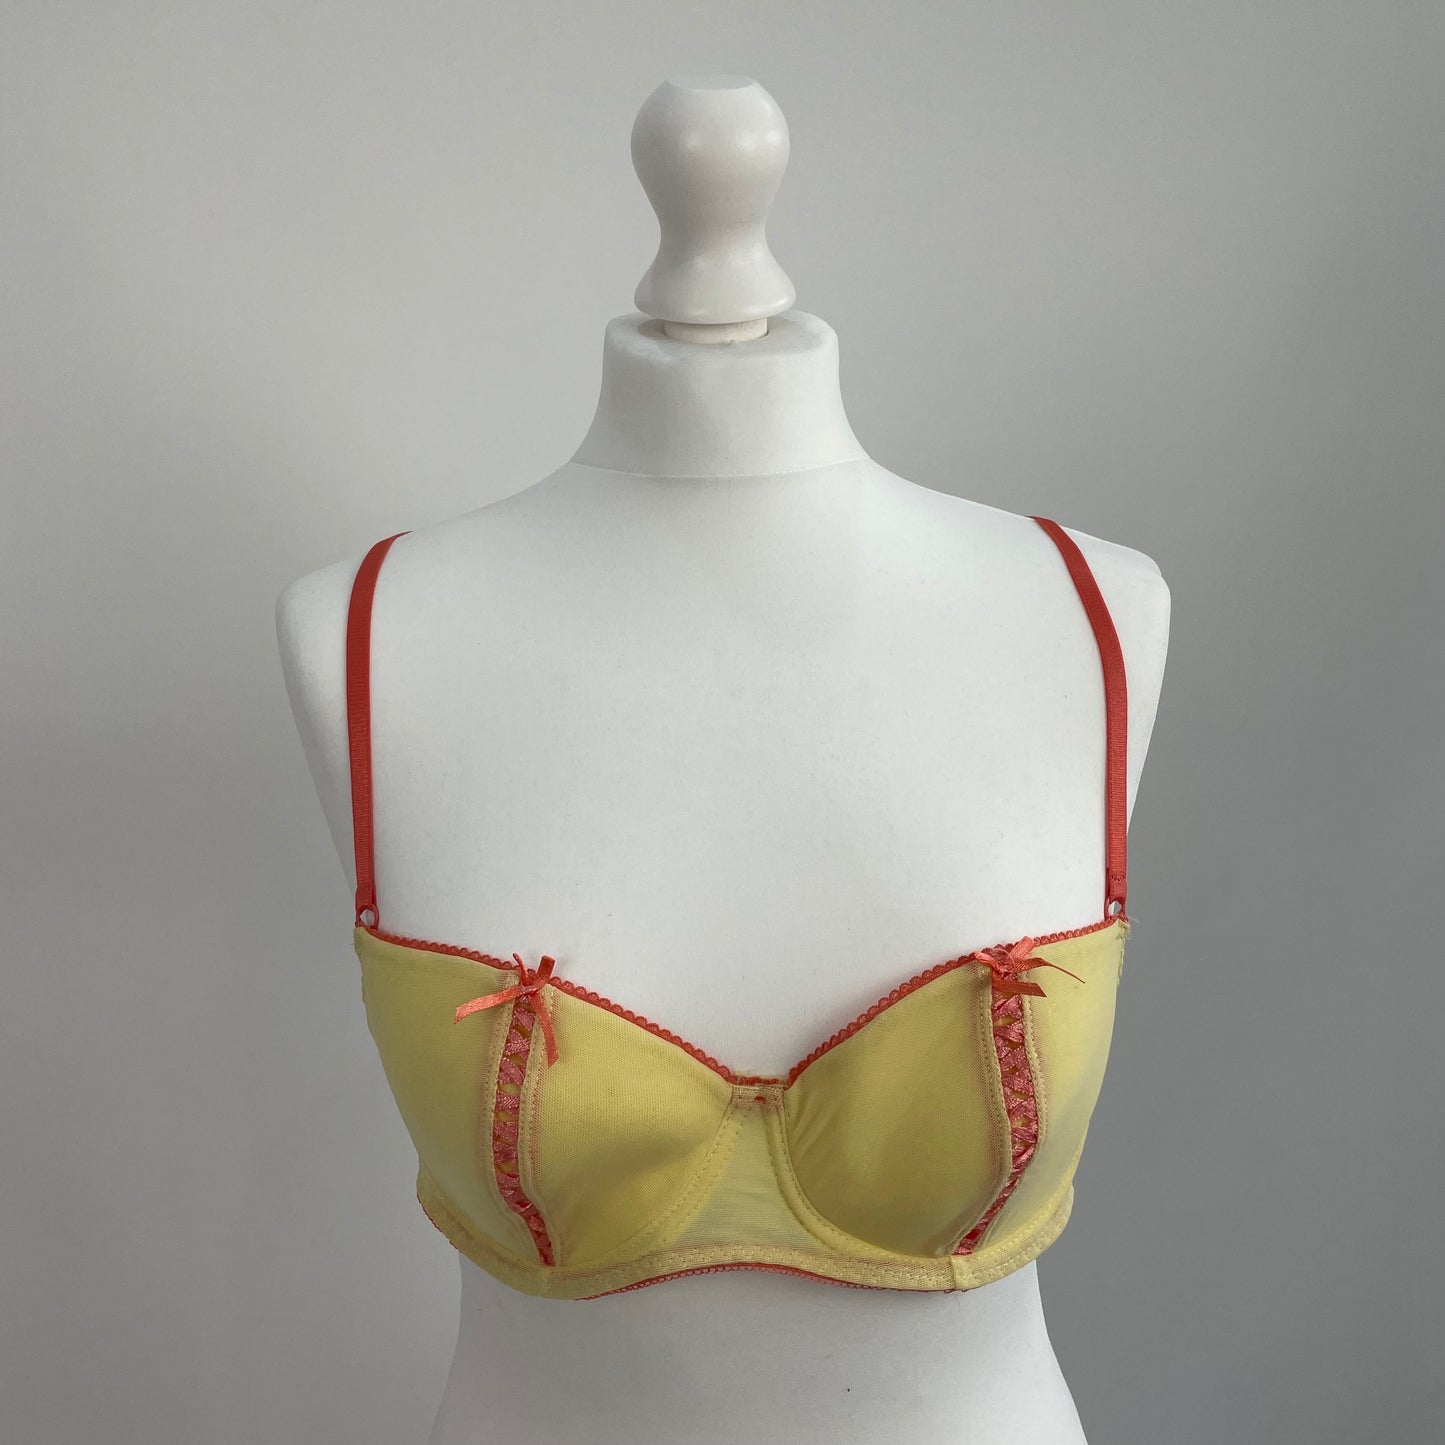 INSTA BADDIE DROP | small yellow and coral padded bra